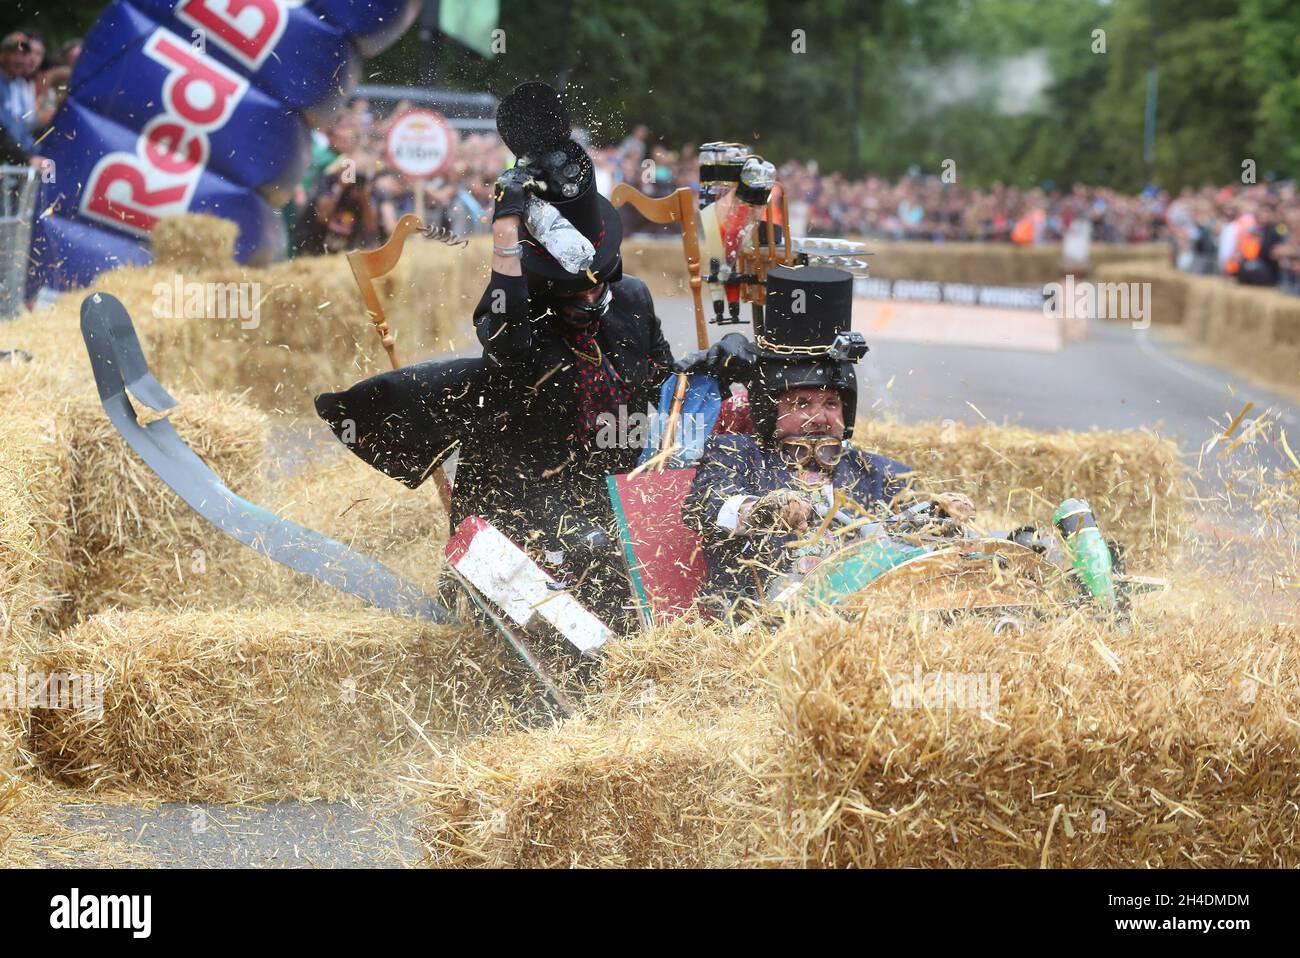 https://c8.alamy.com/comp/2H4DMDM/the-timeout-team-taking-part-in-the-red-bull-soapbox-race-2015-at-londons-alexandra-palace-2H4DMDM.jpg